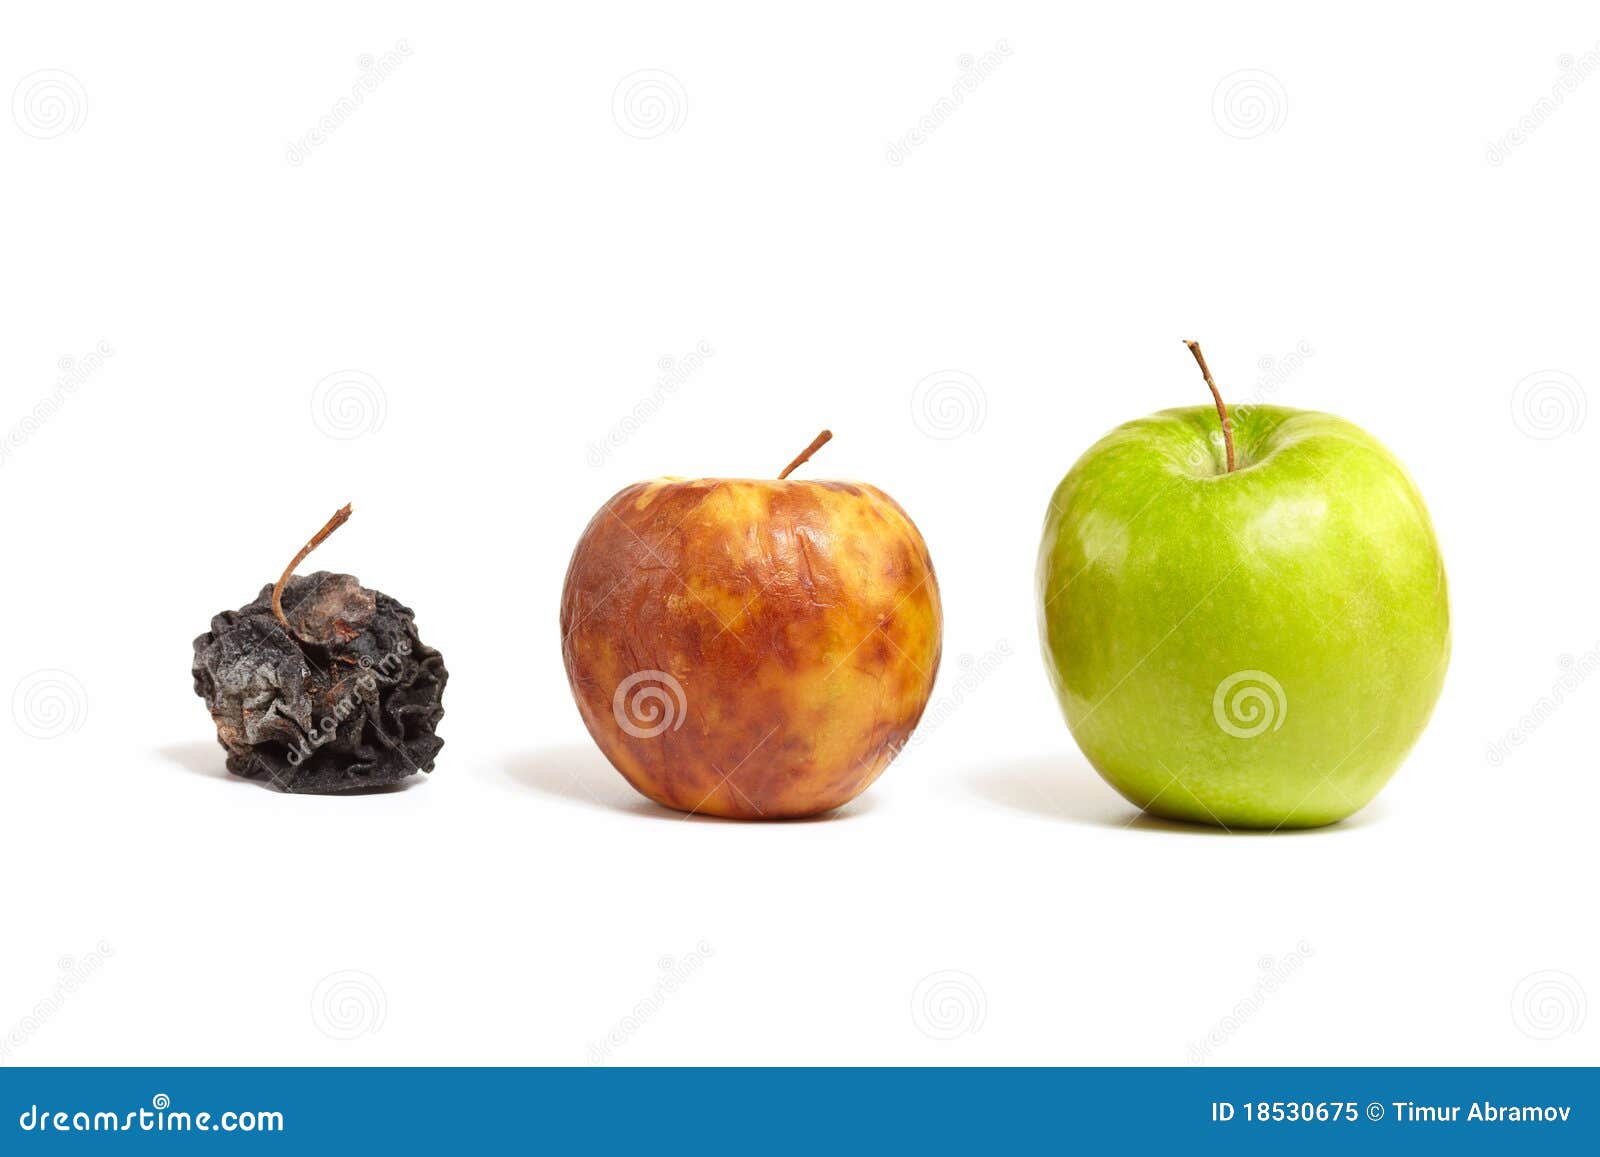 three apples: fresh, rotting and dead